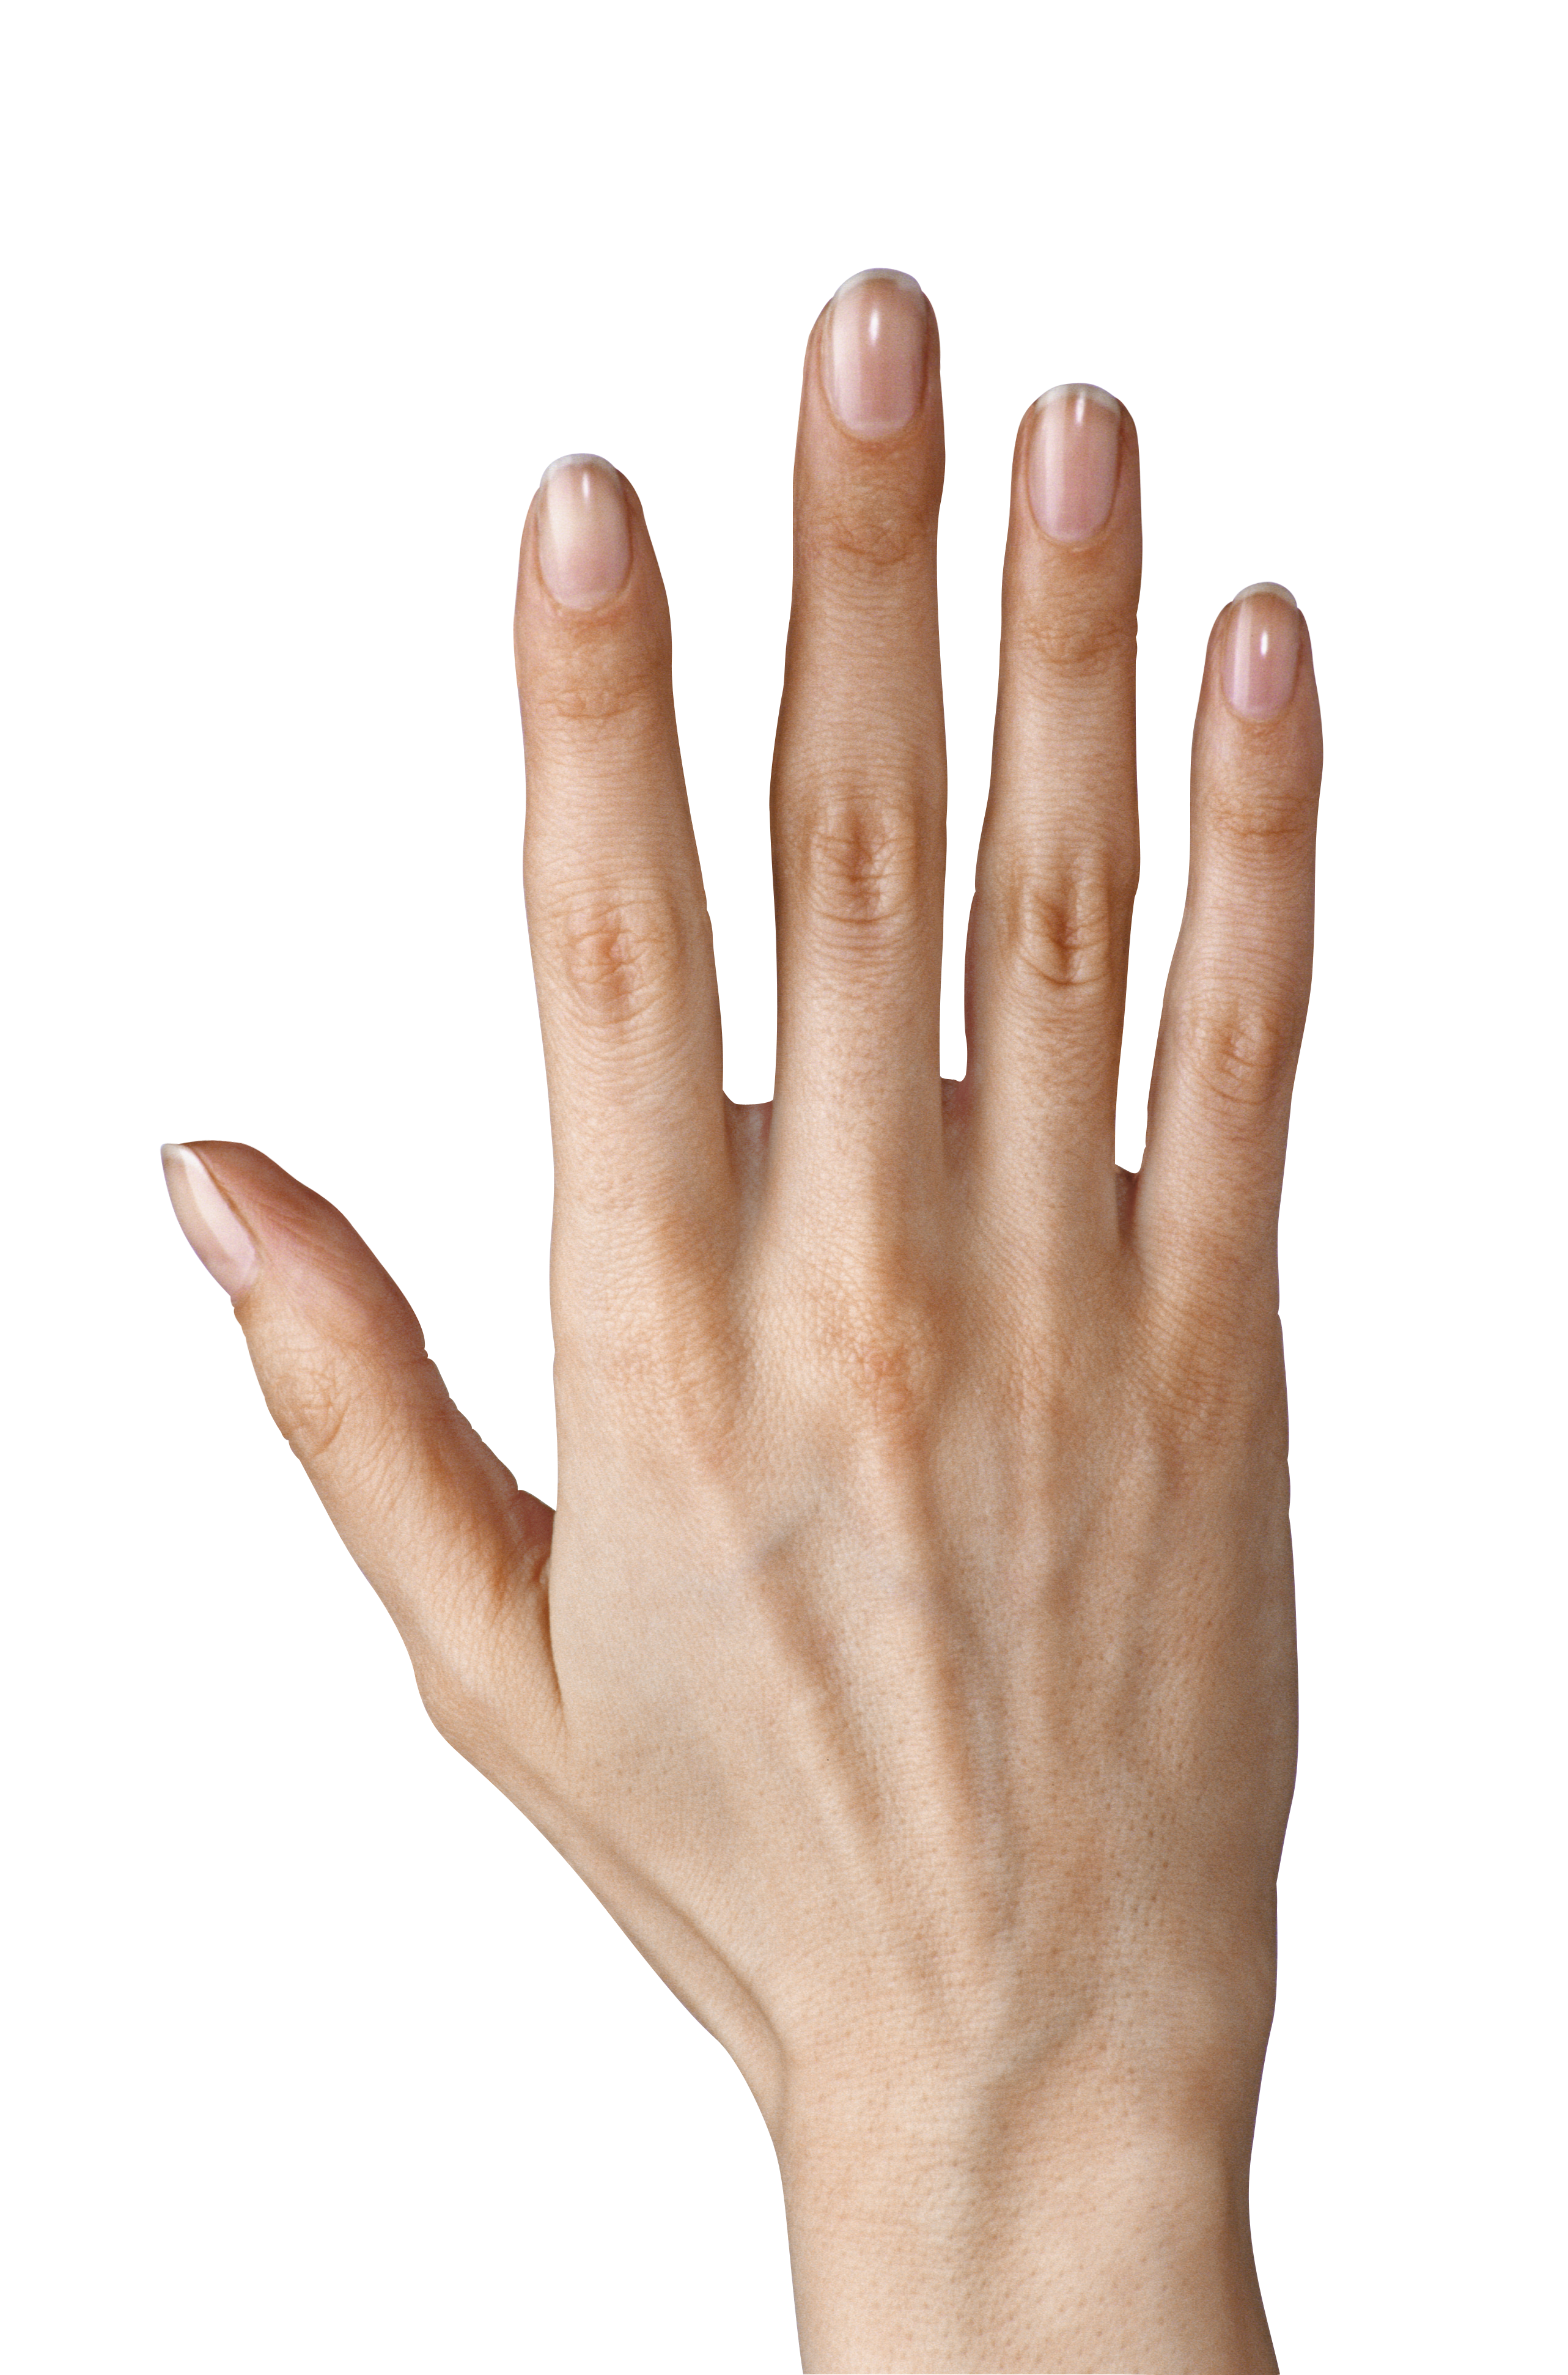  collection of five. Nails clipart woman's hand